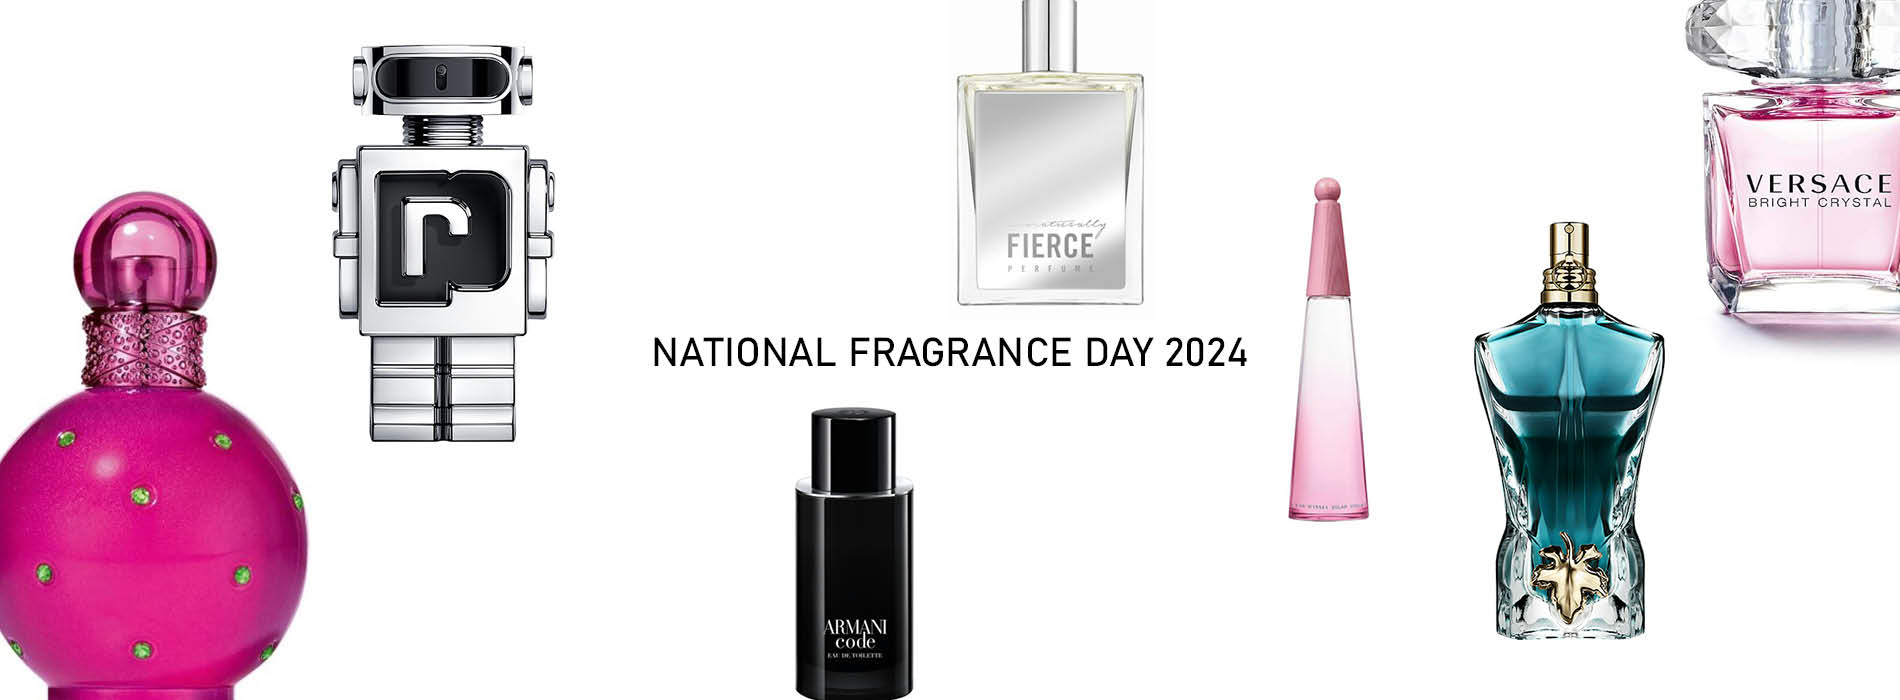 HAPPY NATIONAL FRAGRANCE DAY!